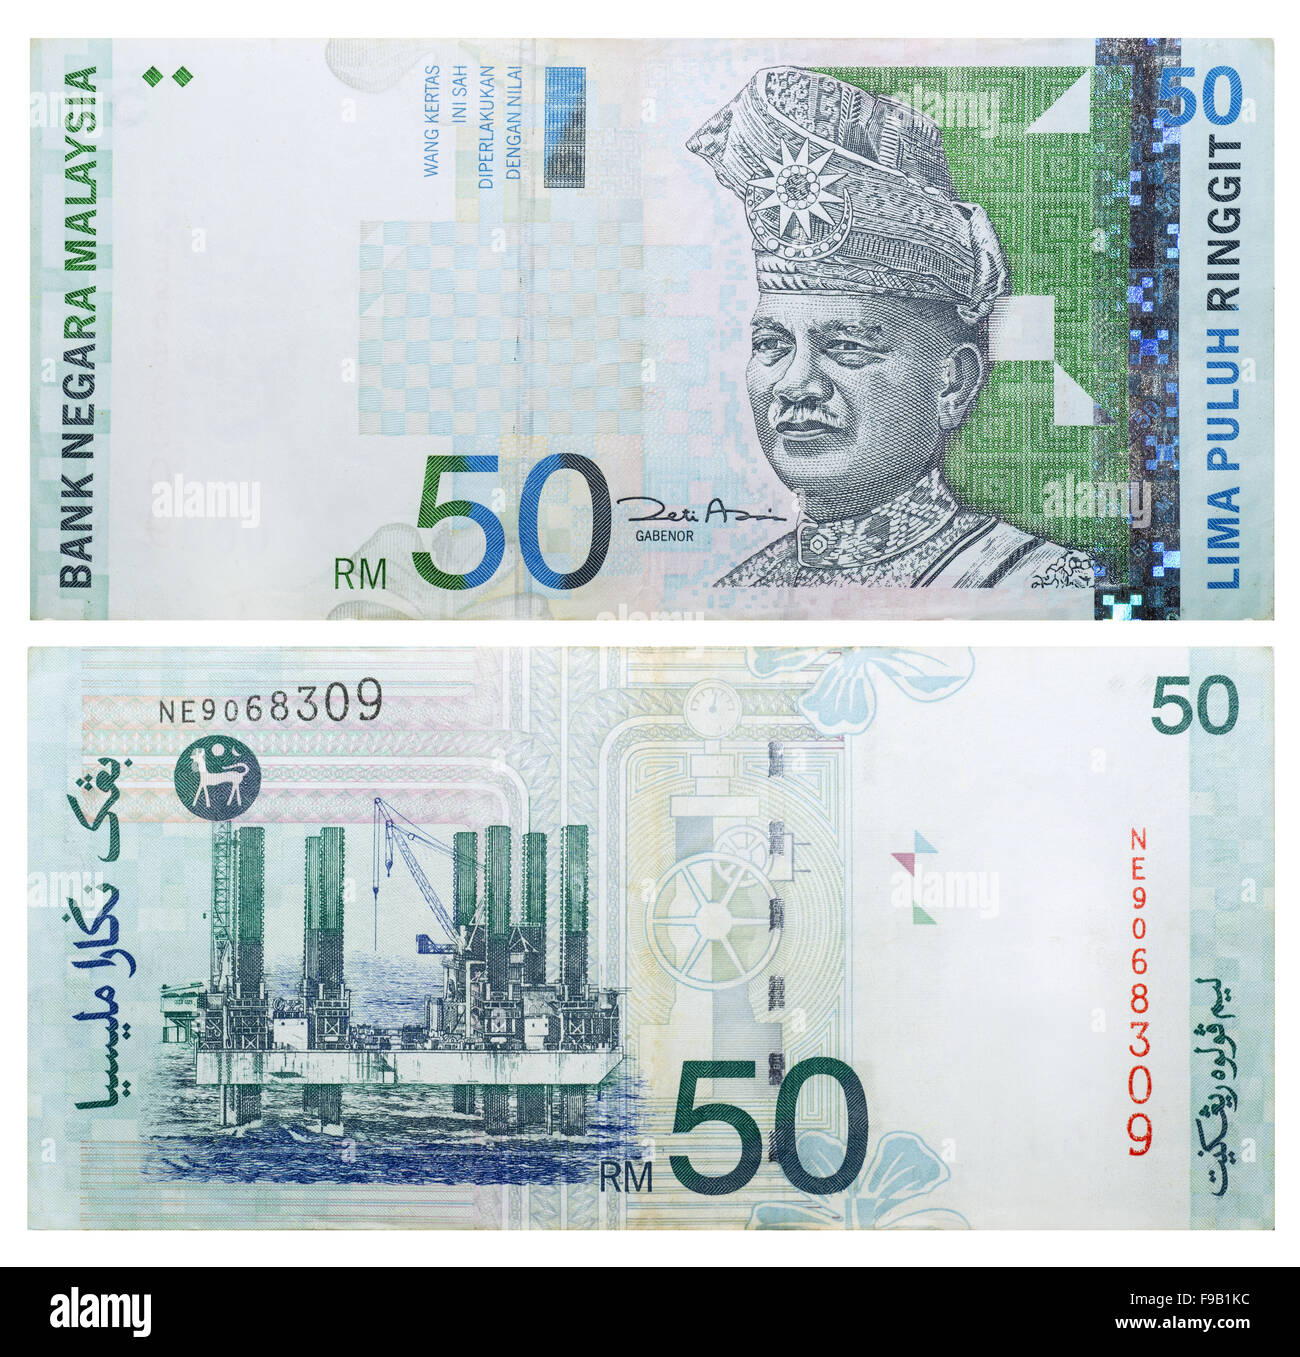 Malaysian Ringgit High Resolution Stock Photography And Images Alamy